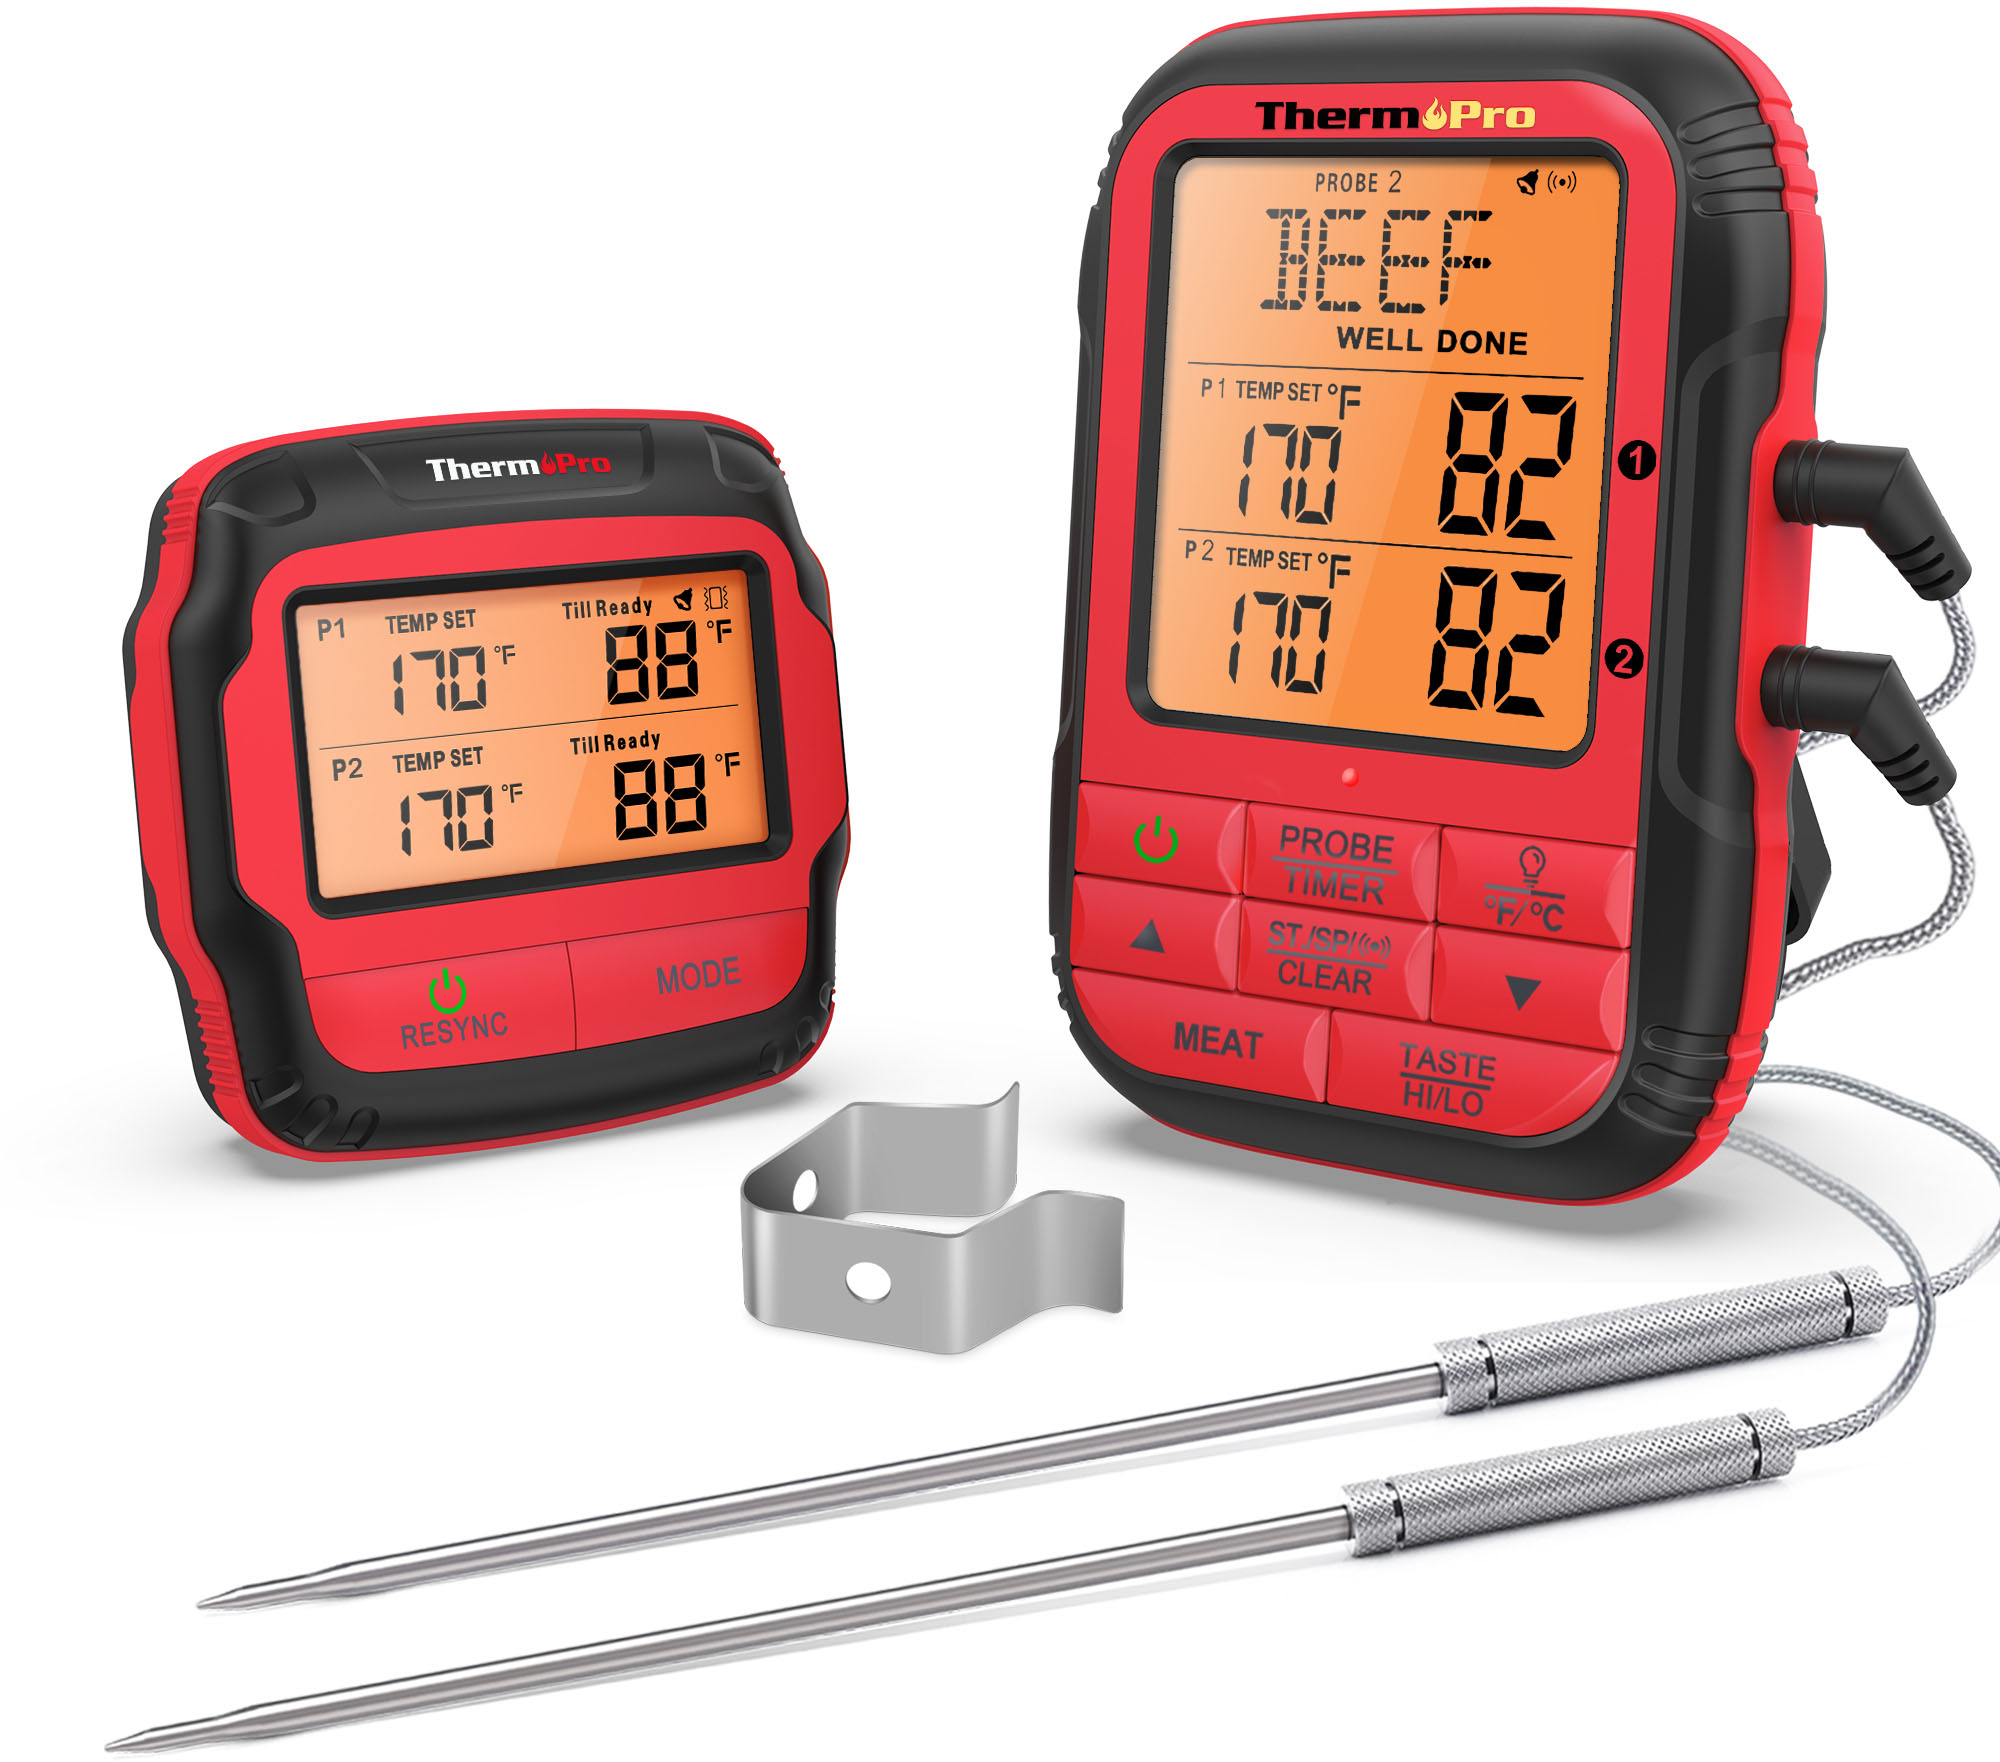 0810012961813 - THERMOPRO - DUAL PROBE WIRELESS MEAT THERMOMETER - RED